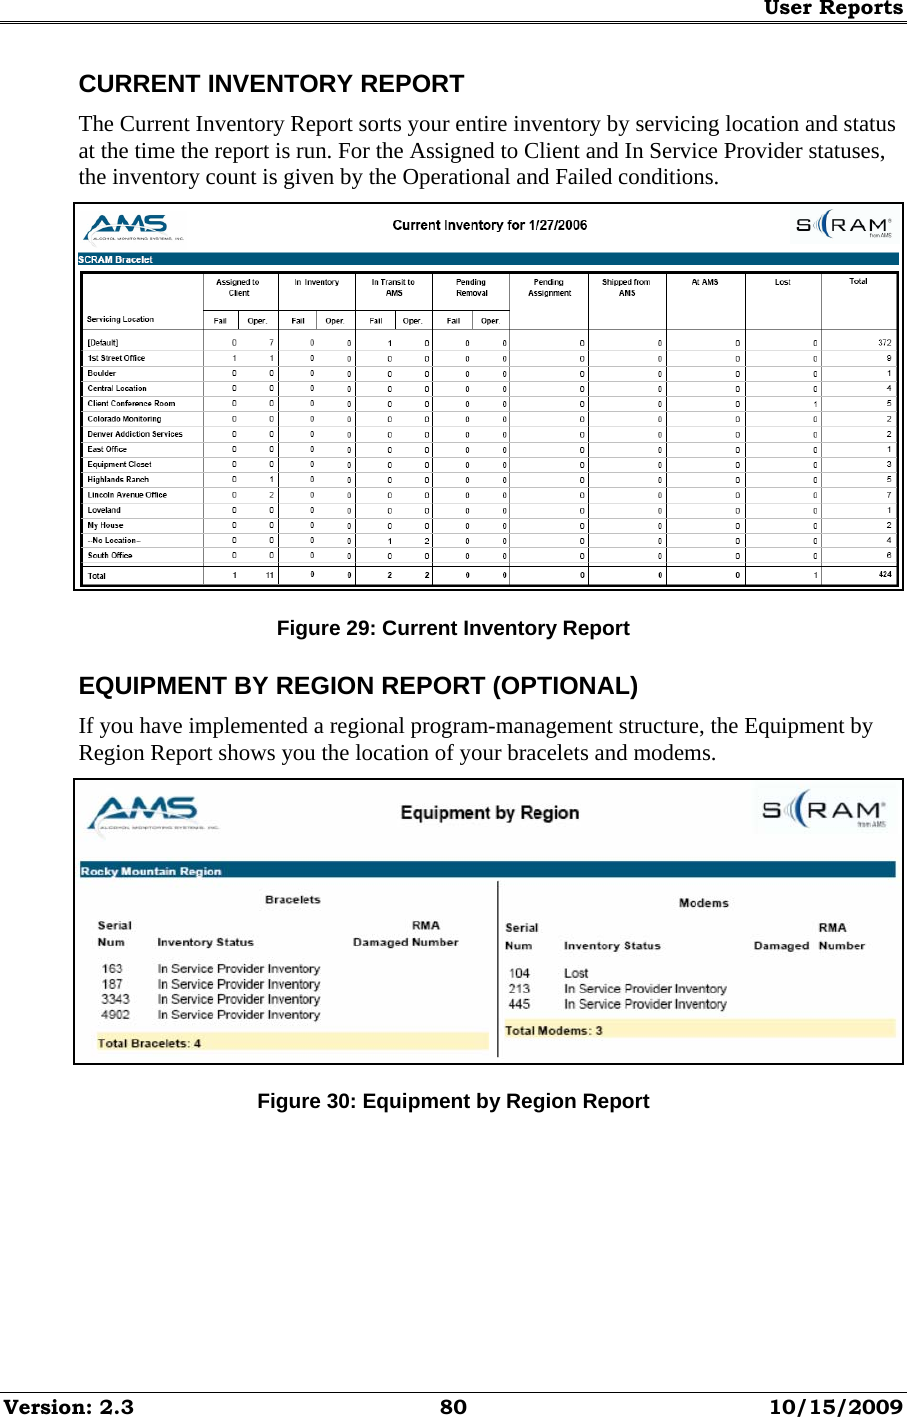 User Reports Version: 2.3  80  10/15/2009 CURRENT INVENTORY REPORT The Current Inventory Report sorts your entire inventory by servicing location and status at the time the report is run. For the Assigned to Client and In Service Provider statuses, the inventory count is given by the Operational and Failed conditions.  Figure 29: Current Inventory Report EQUIPMENT BY REGION REPORT (OPTIONAL) If you have implemented a regional program-management structure, the Equipment by Region Report shows you the location of your bracelets and modems.  Figure 30: Equipment by Region Report 